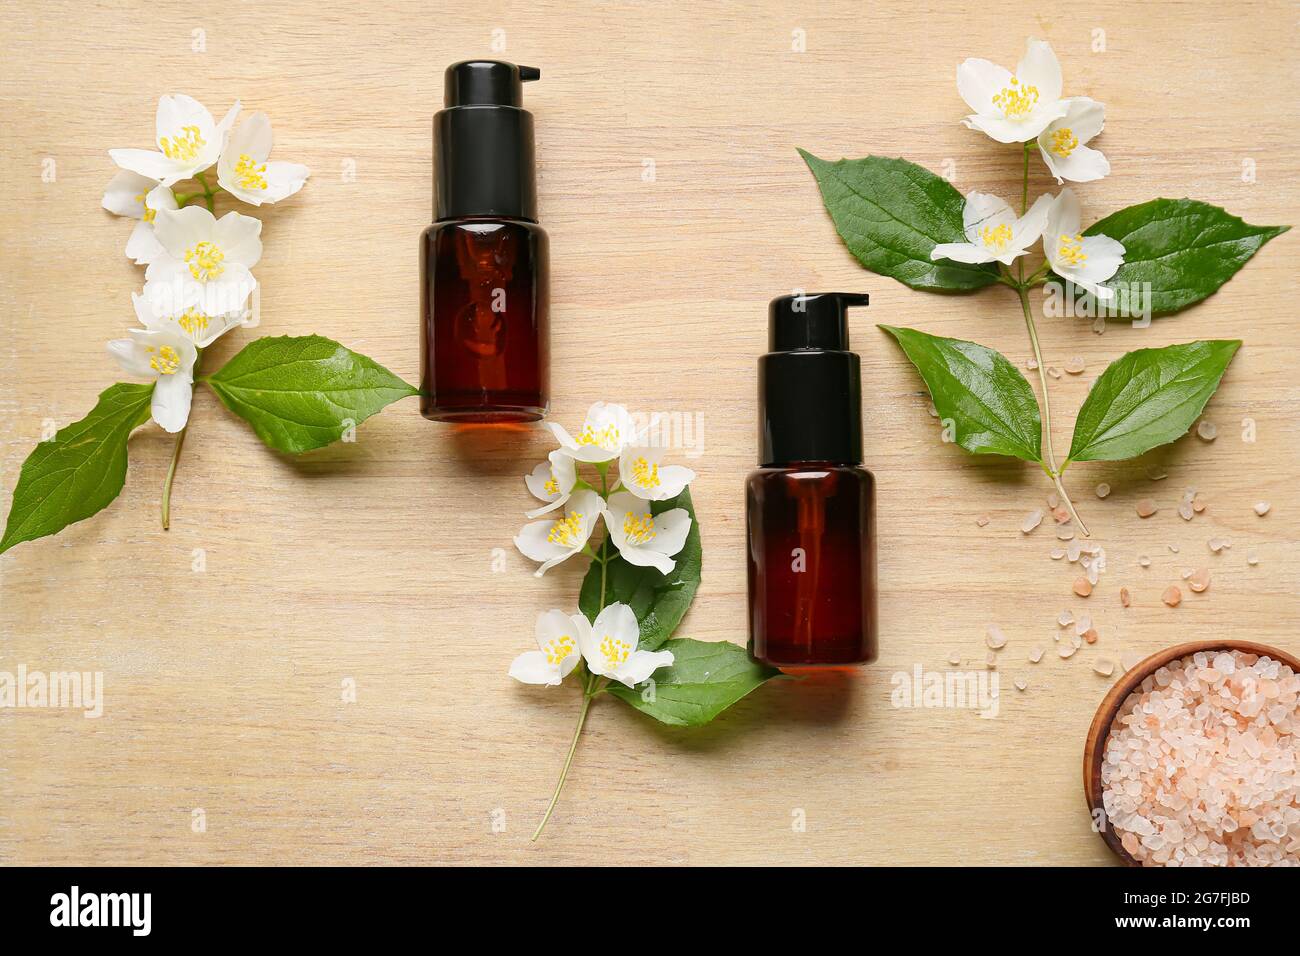 Bottles of cosmetic products, sea salt and jasmine flowers on wooden background Stock Photo